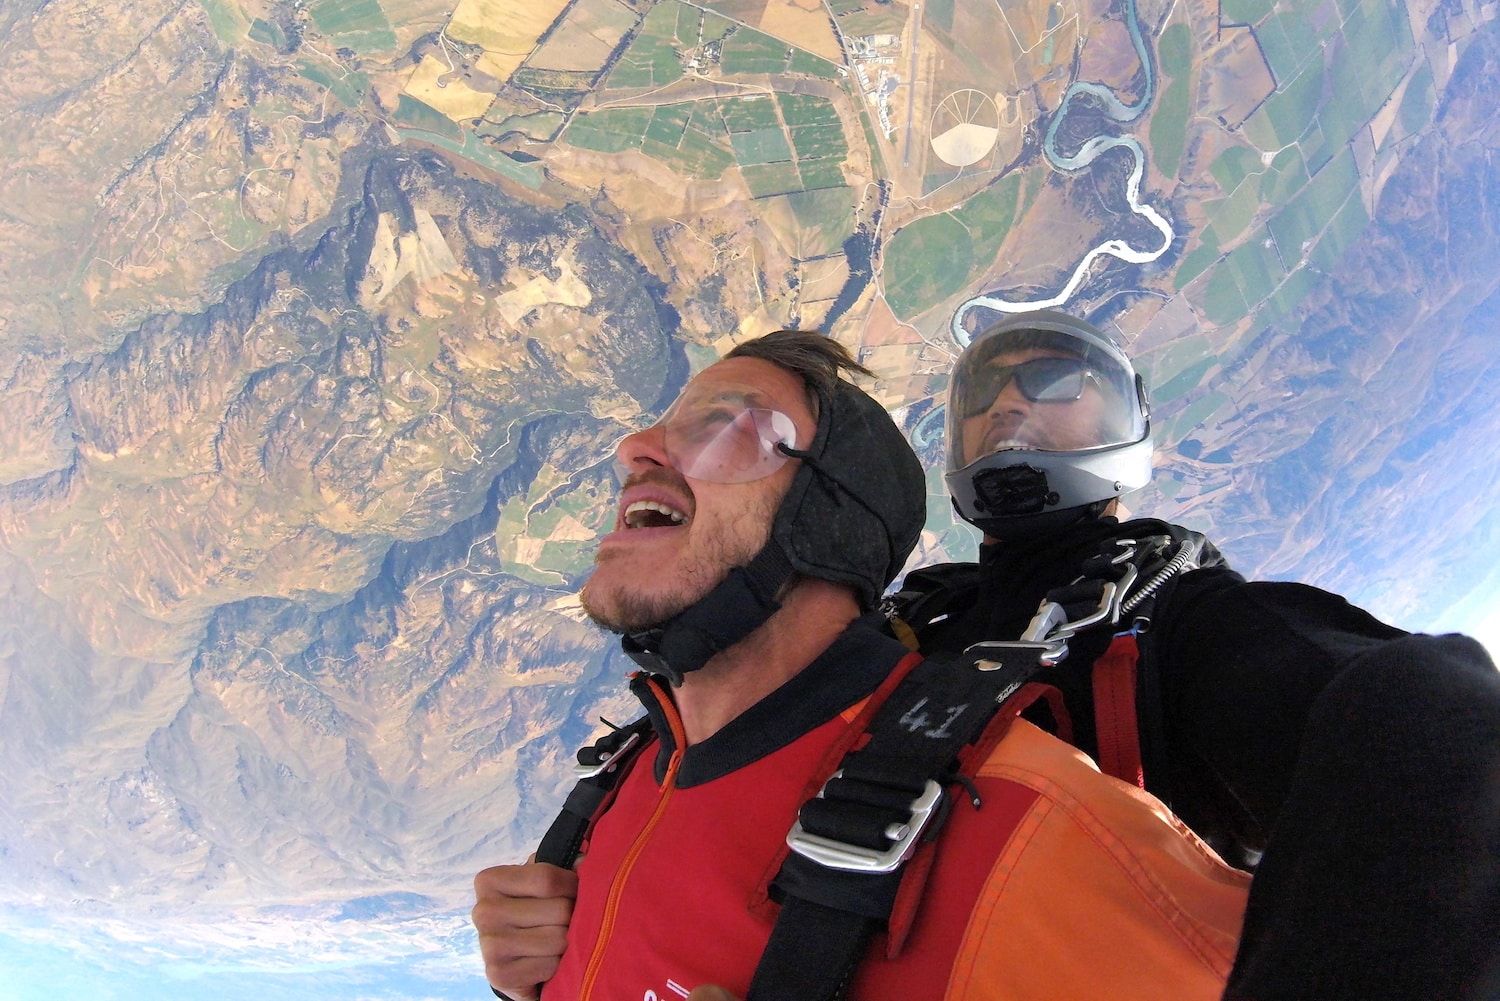 Skydiving New Zealand Style